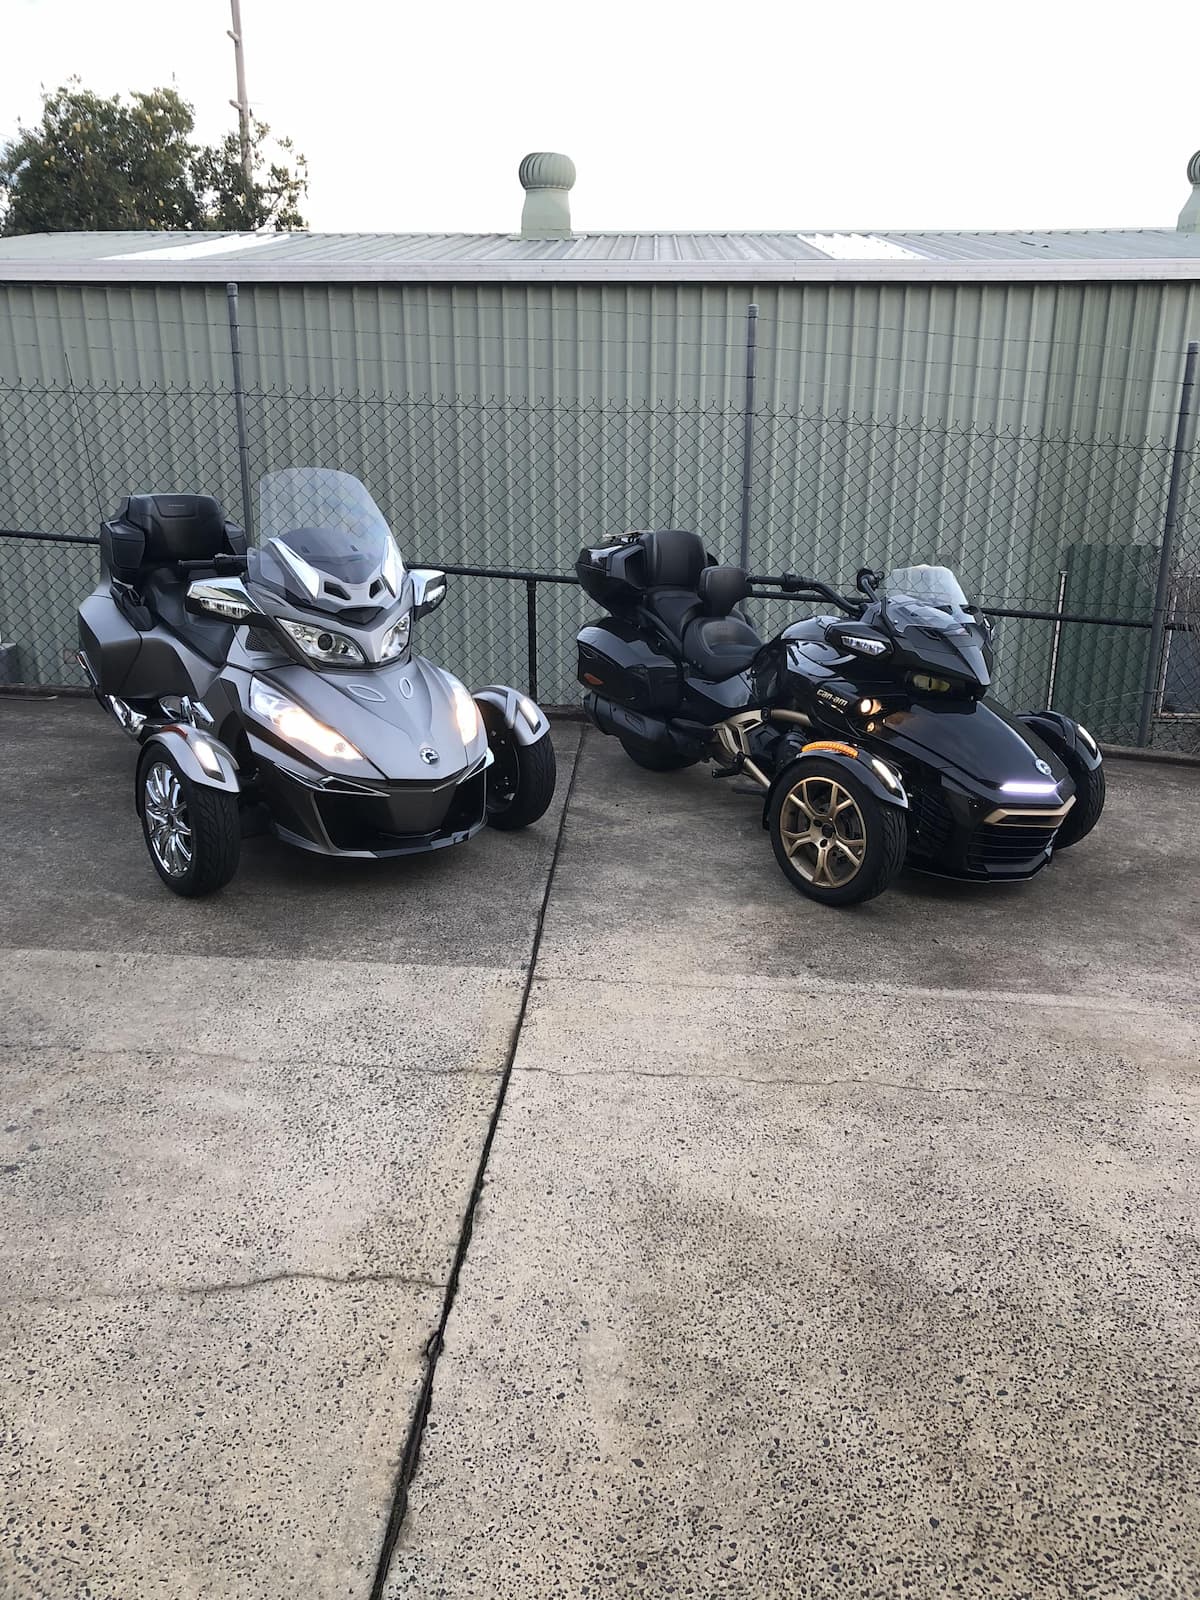 A Silver and A Black Can-Am Spyders - Motorbike Repairs in Lismore, NSW